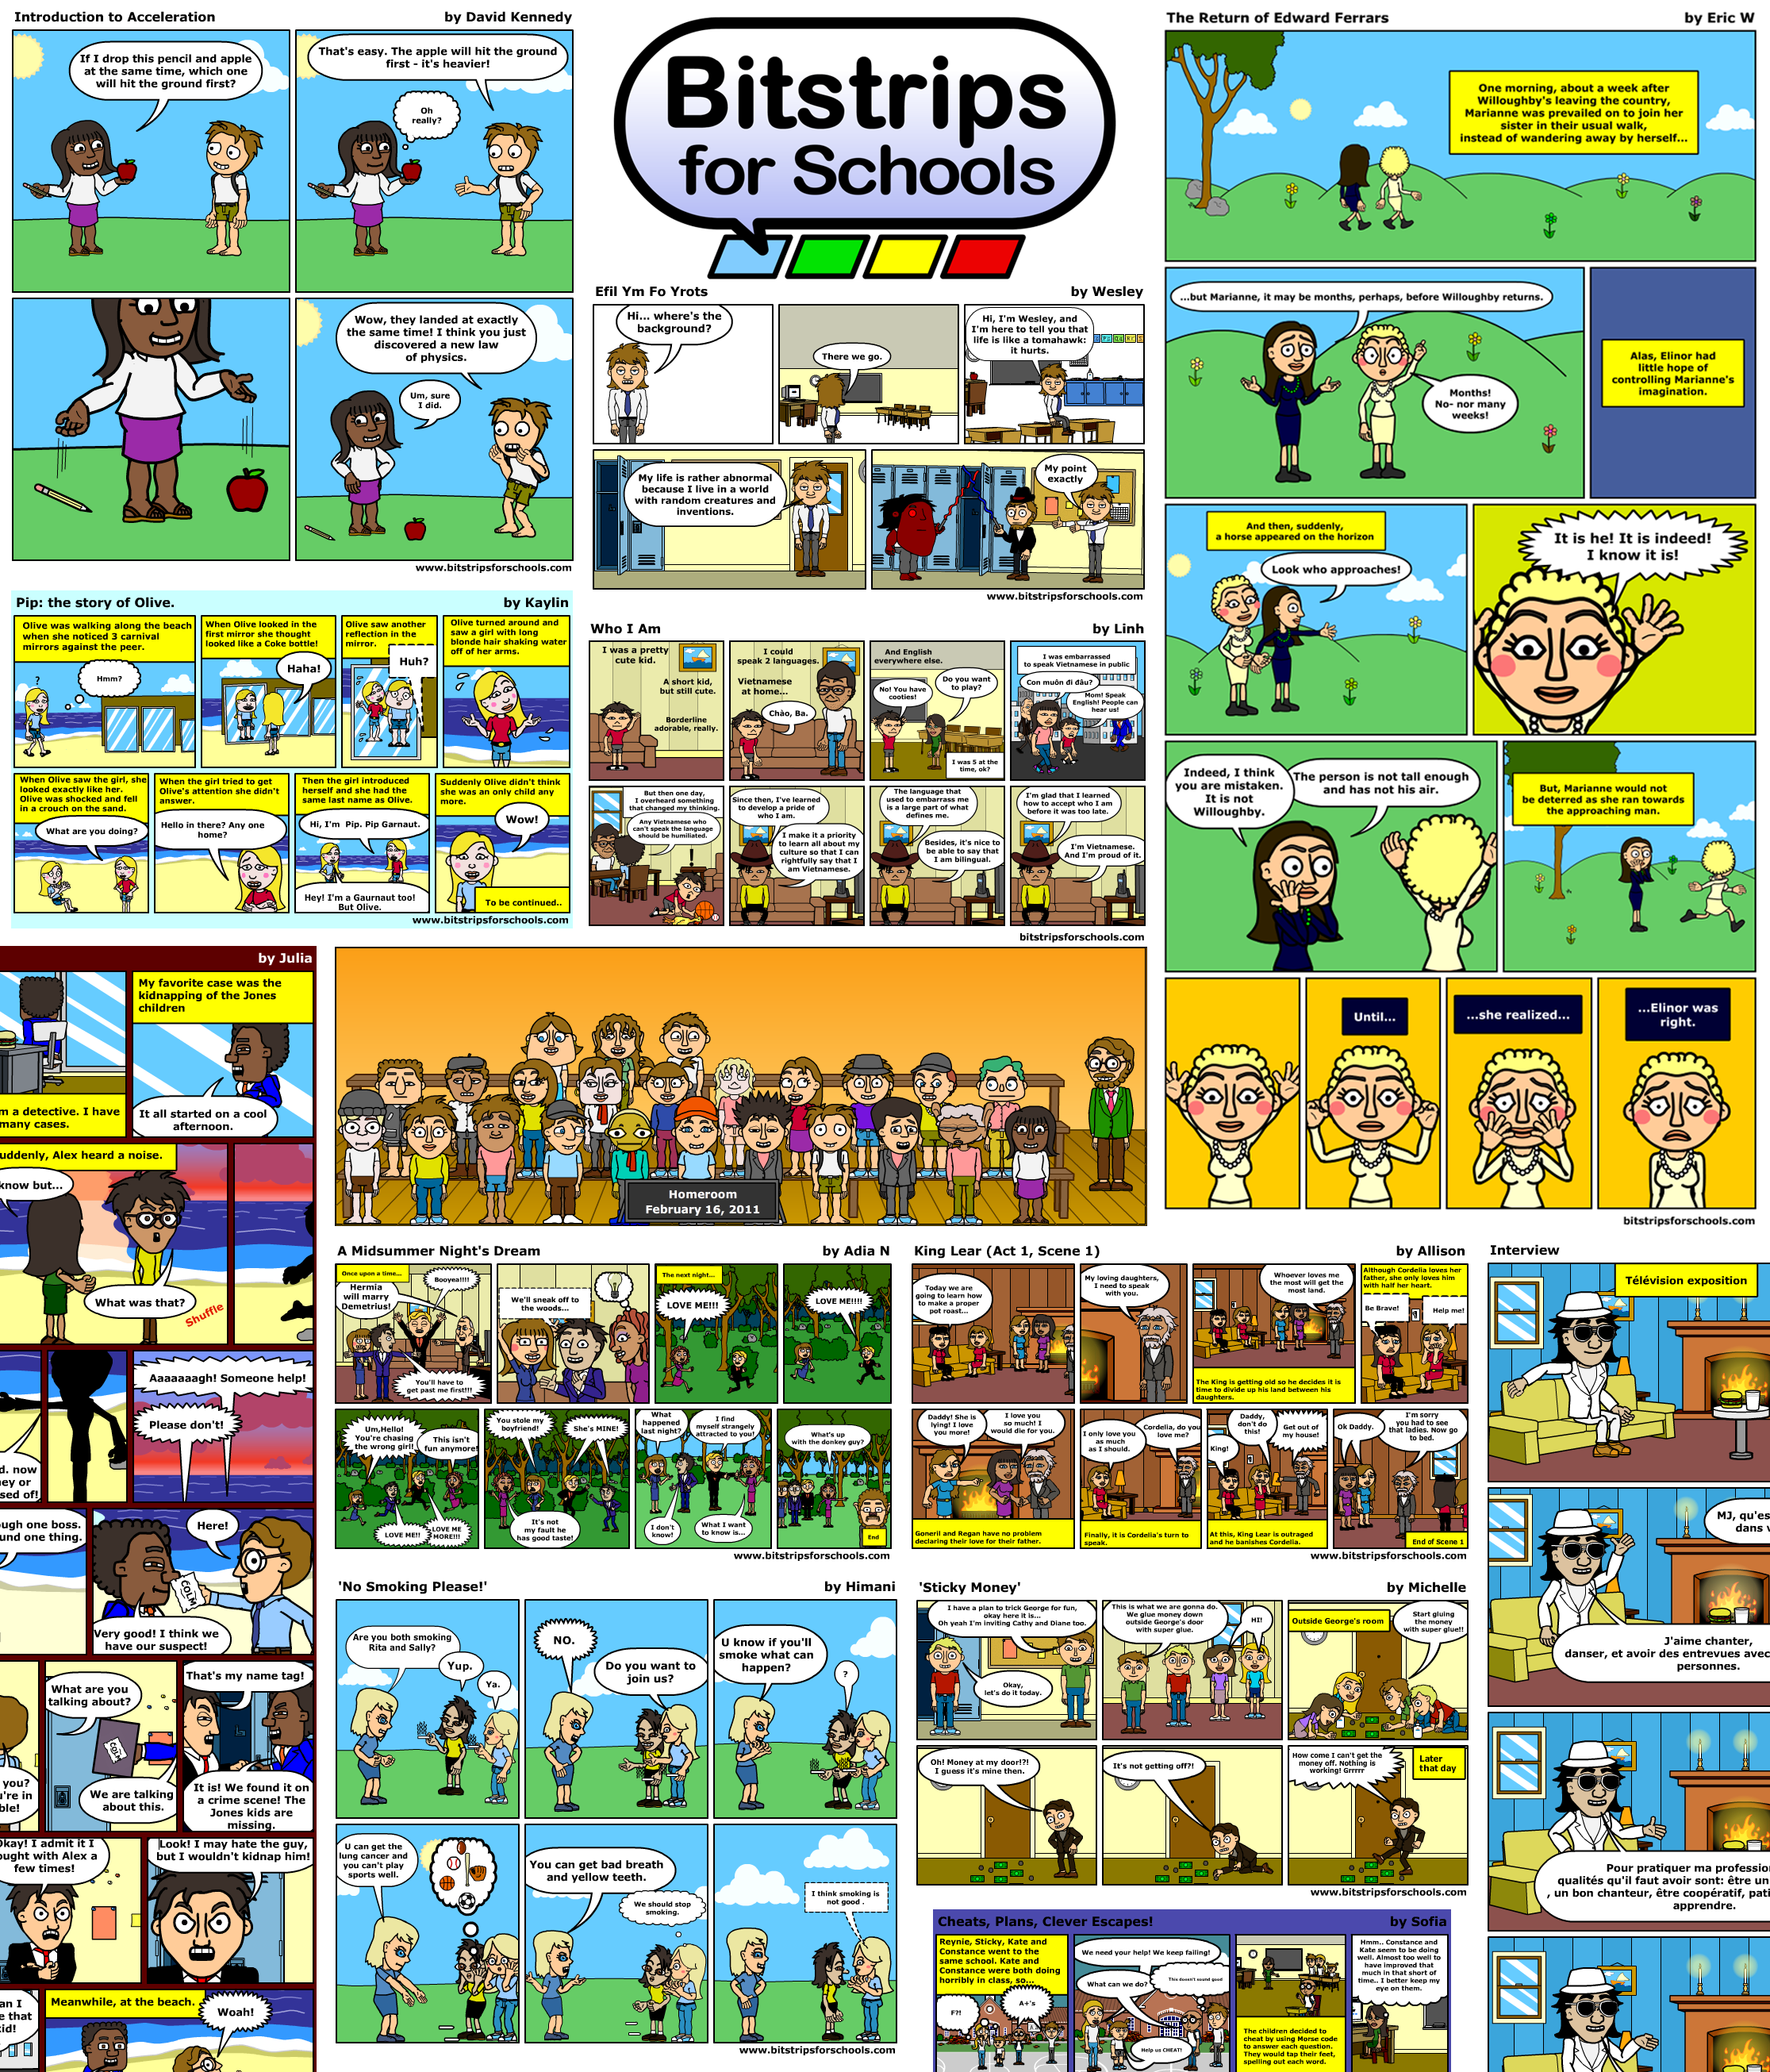 Bitstrips for Schools student collage